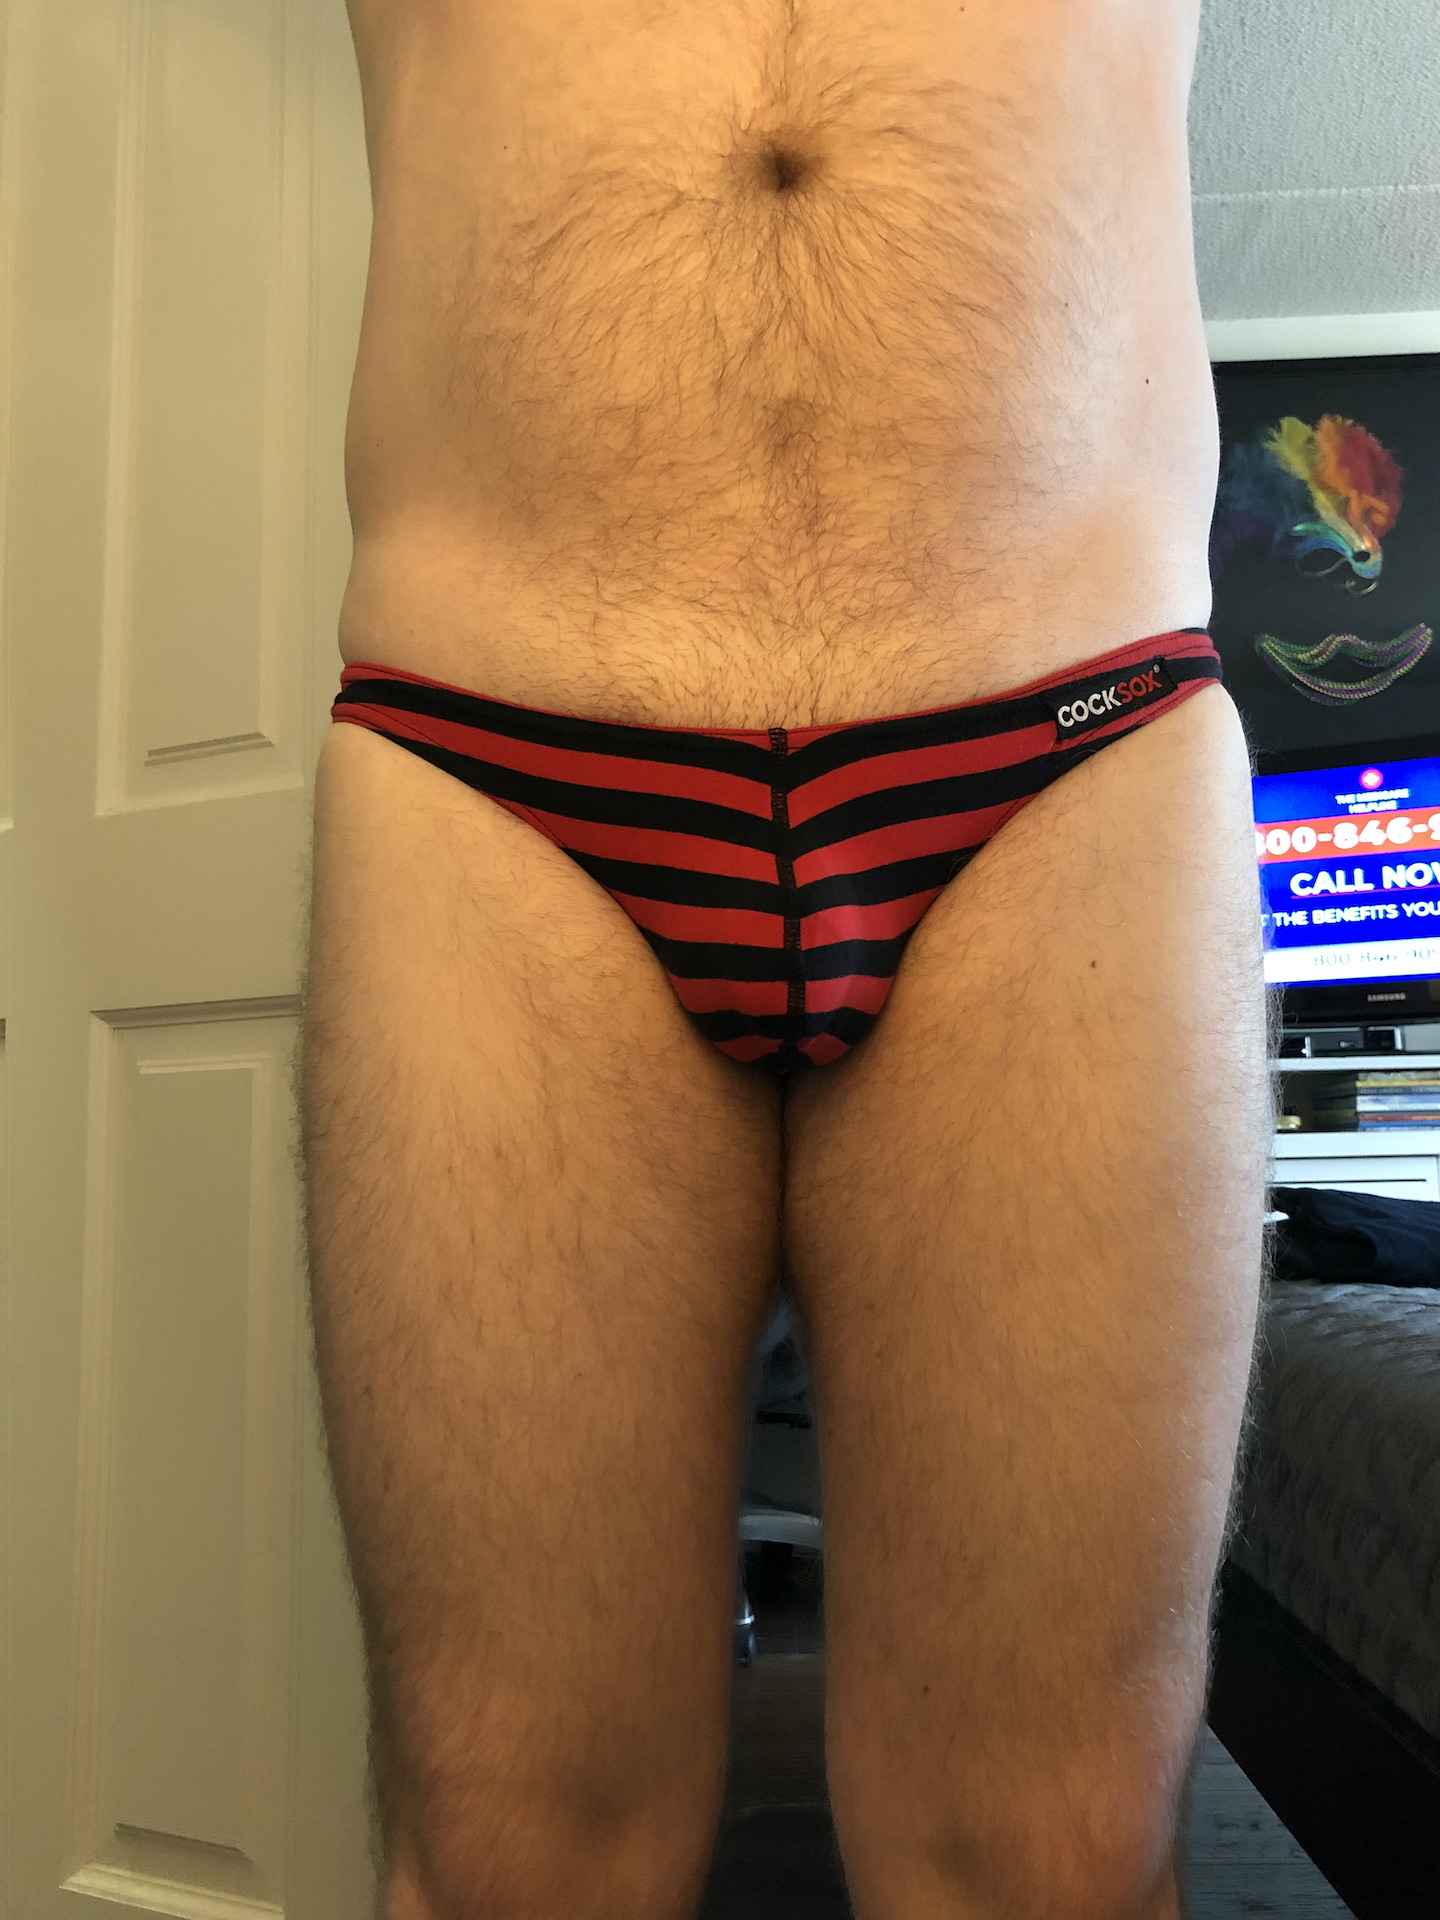 Red and black stripes from cocksox today…